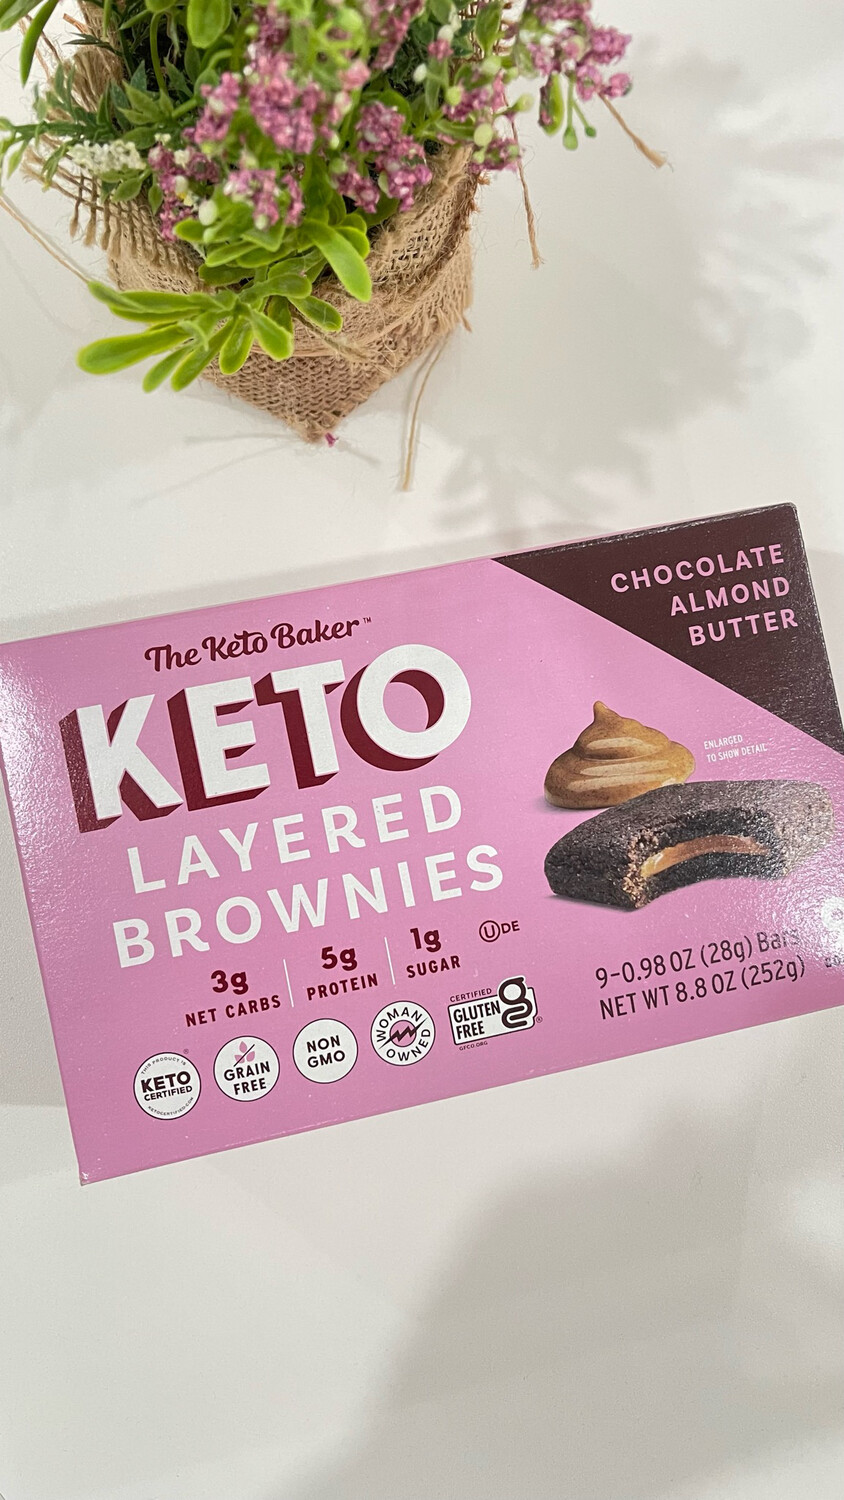 The Keto Baker Layered Brownies Chocolate Almond Butter